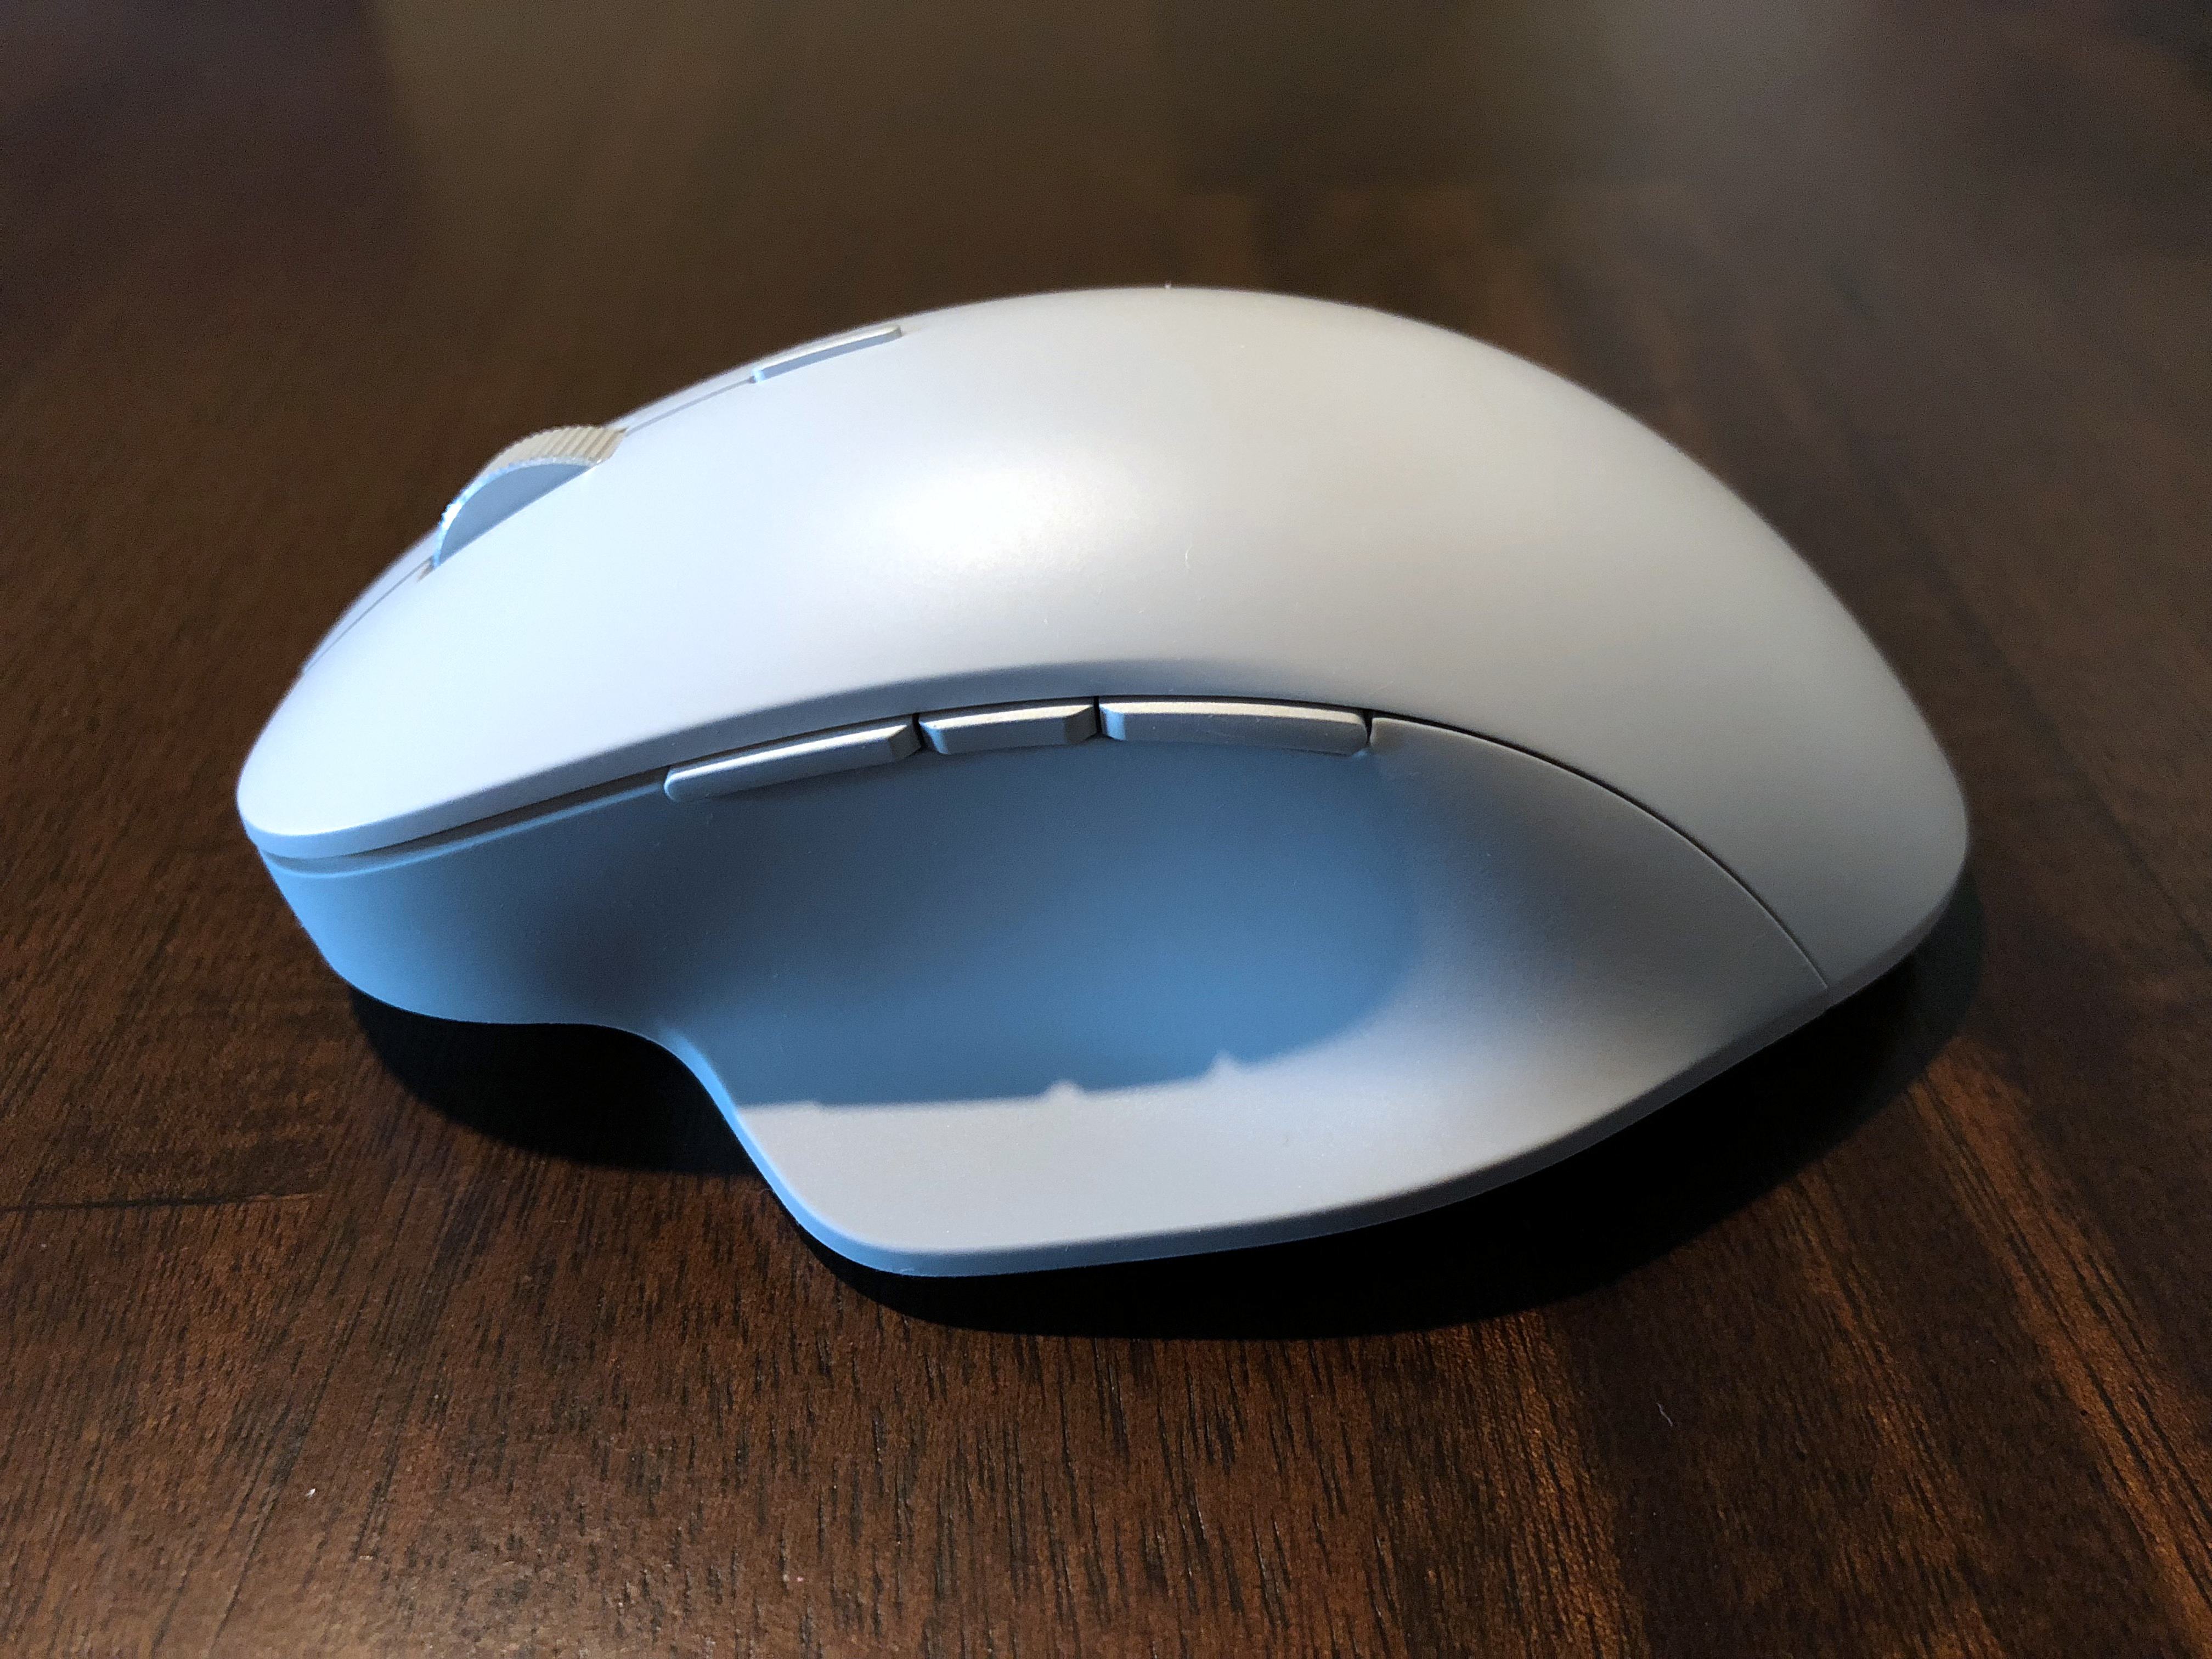 best bluetooth mouse for mac 2017